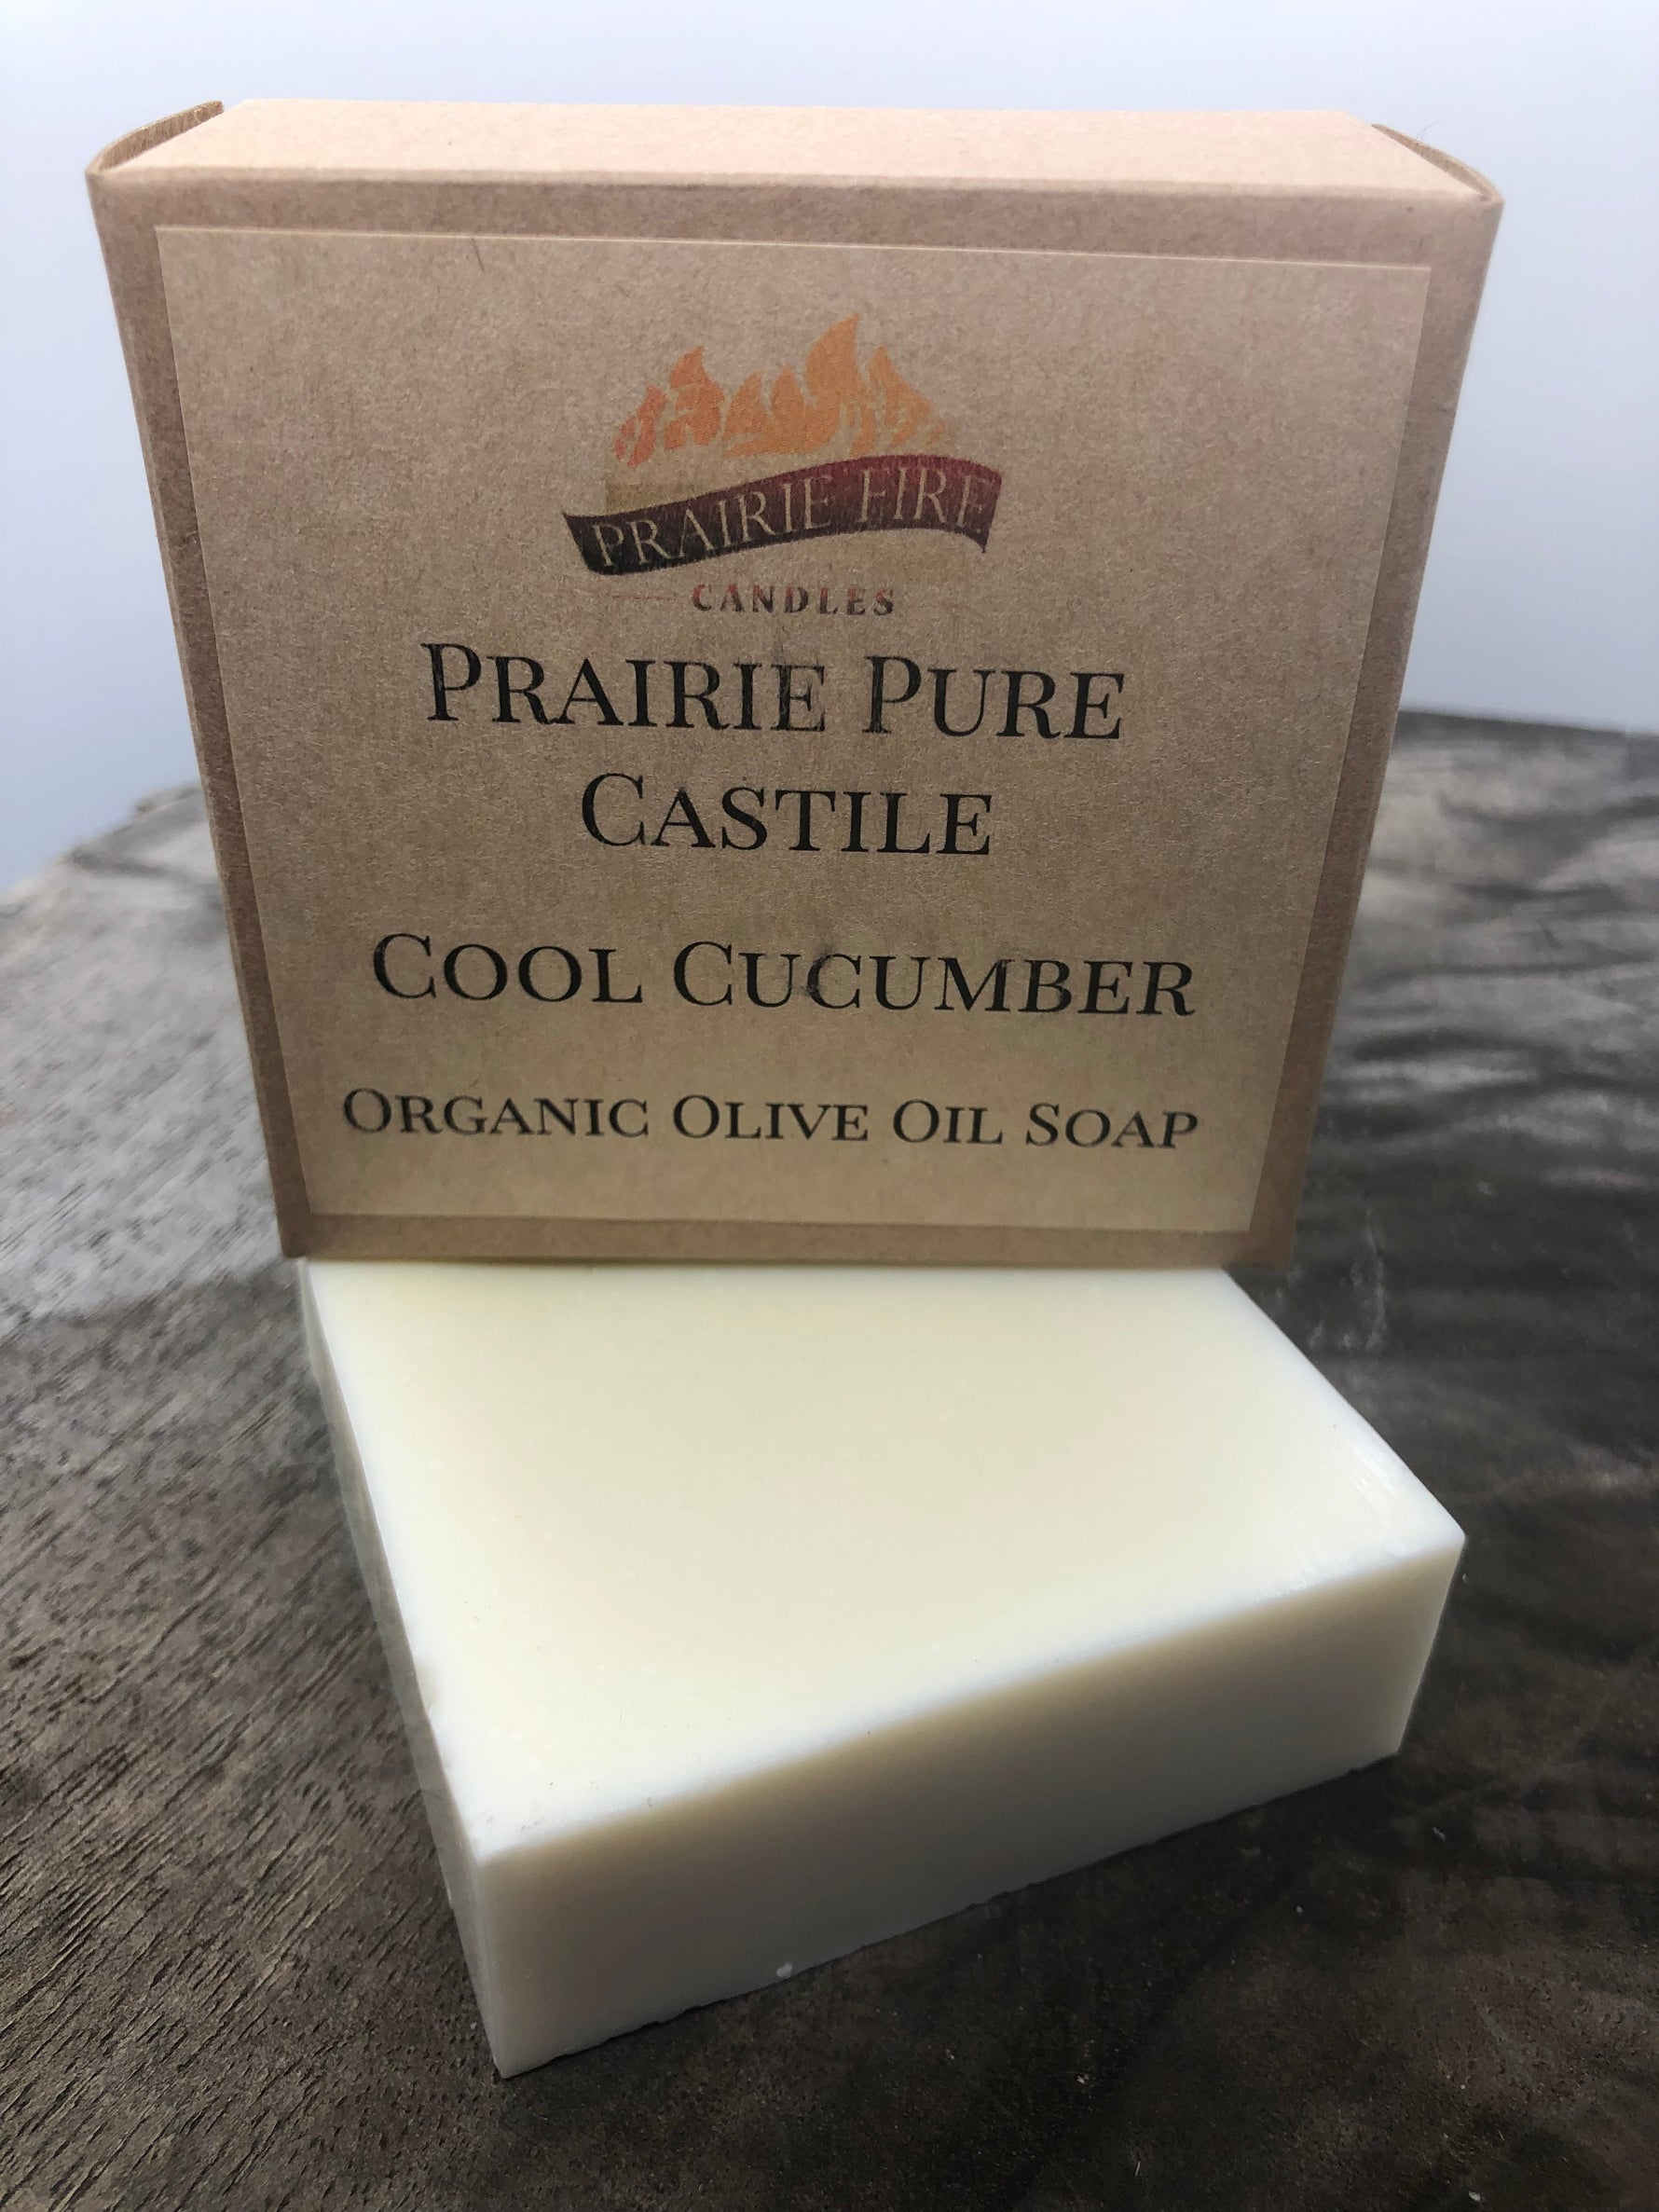 Cool Cucumber Real Castile Organic Olive Oil Soap for Sensitive Skin - Dye Free - 100% Certified Organic Extra Virgin Olive Oil-3